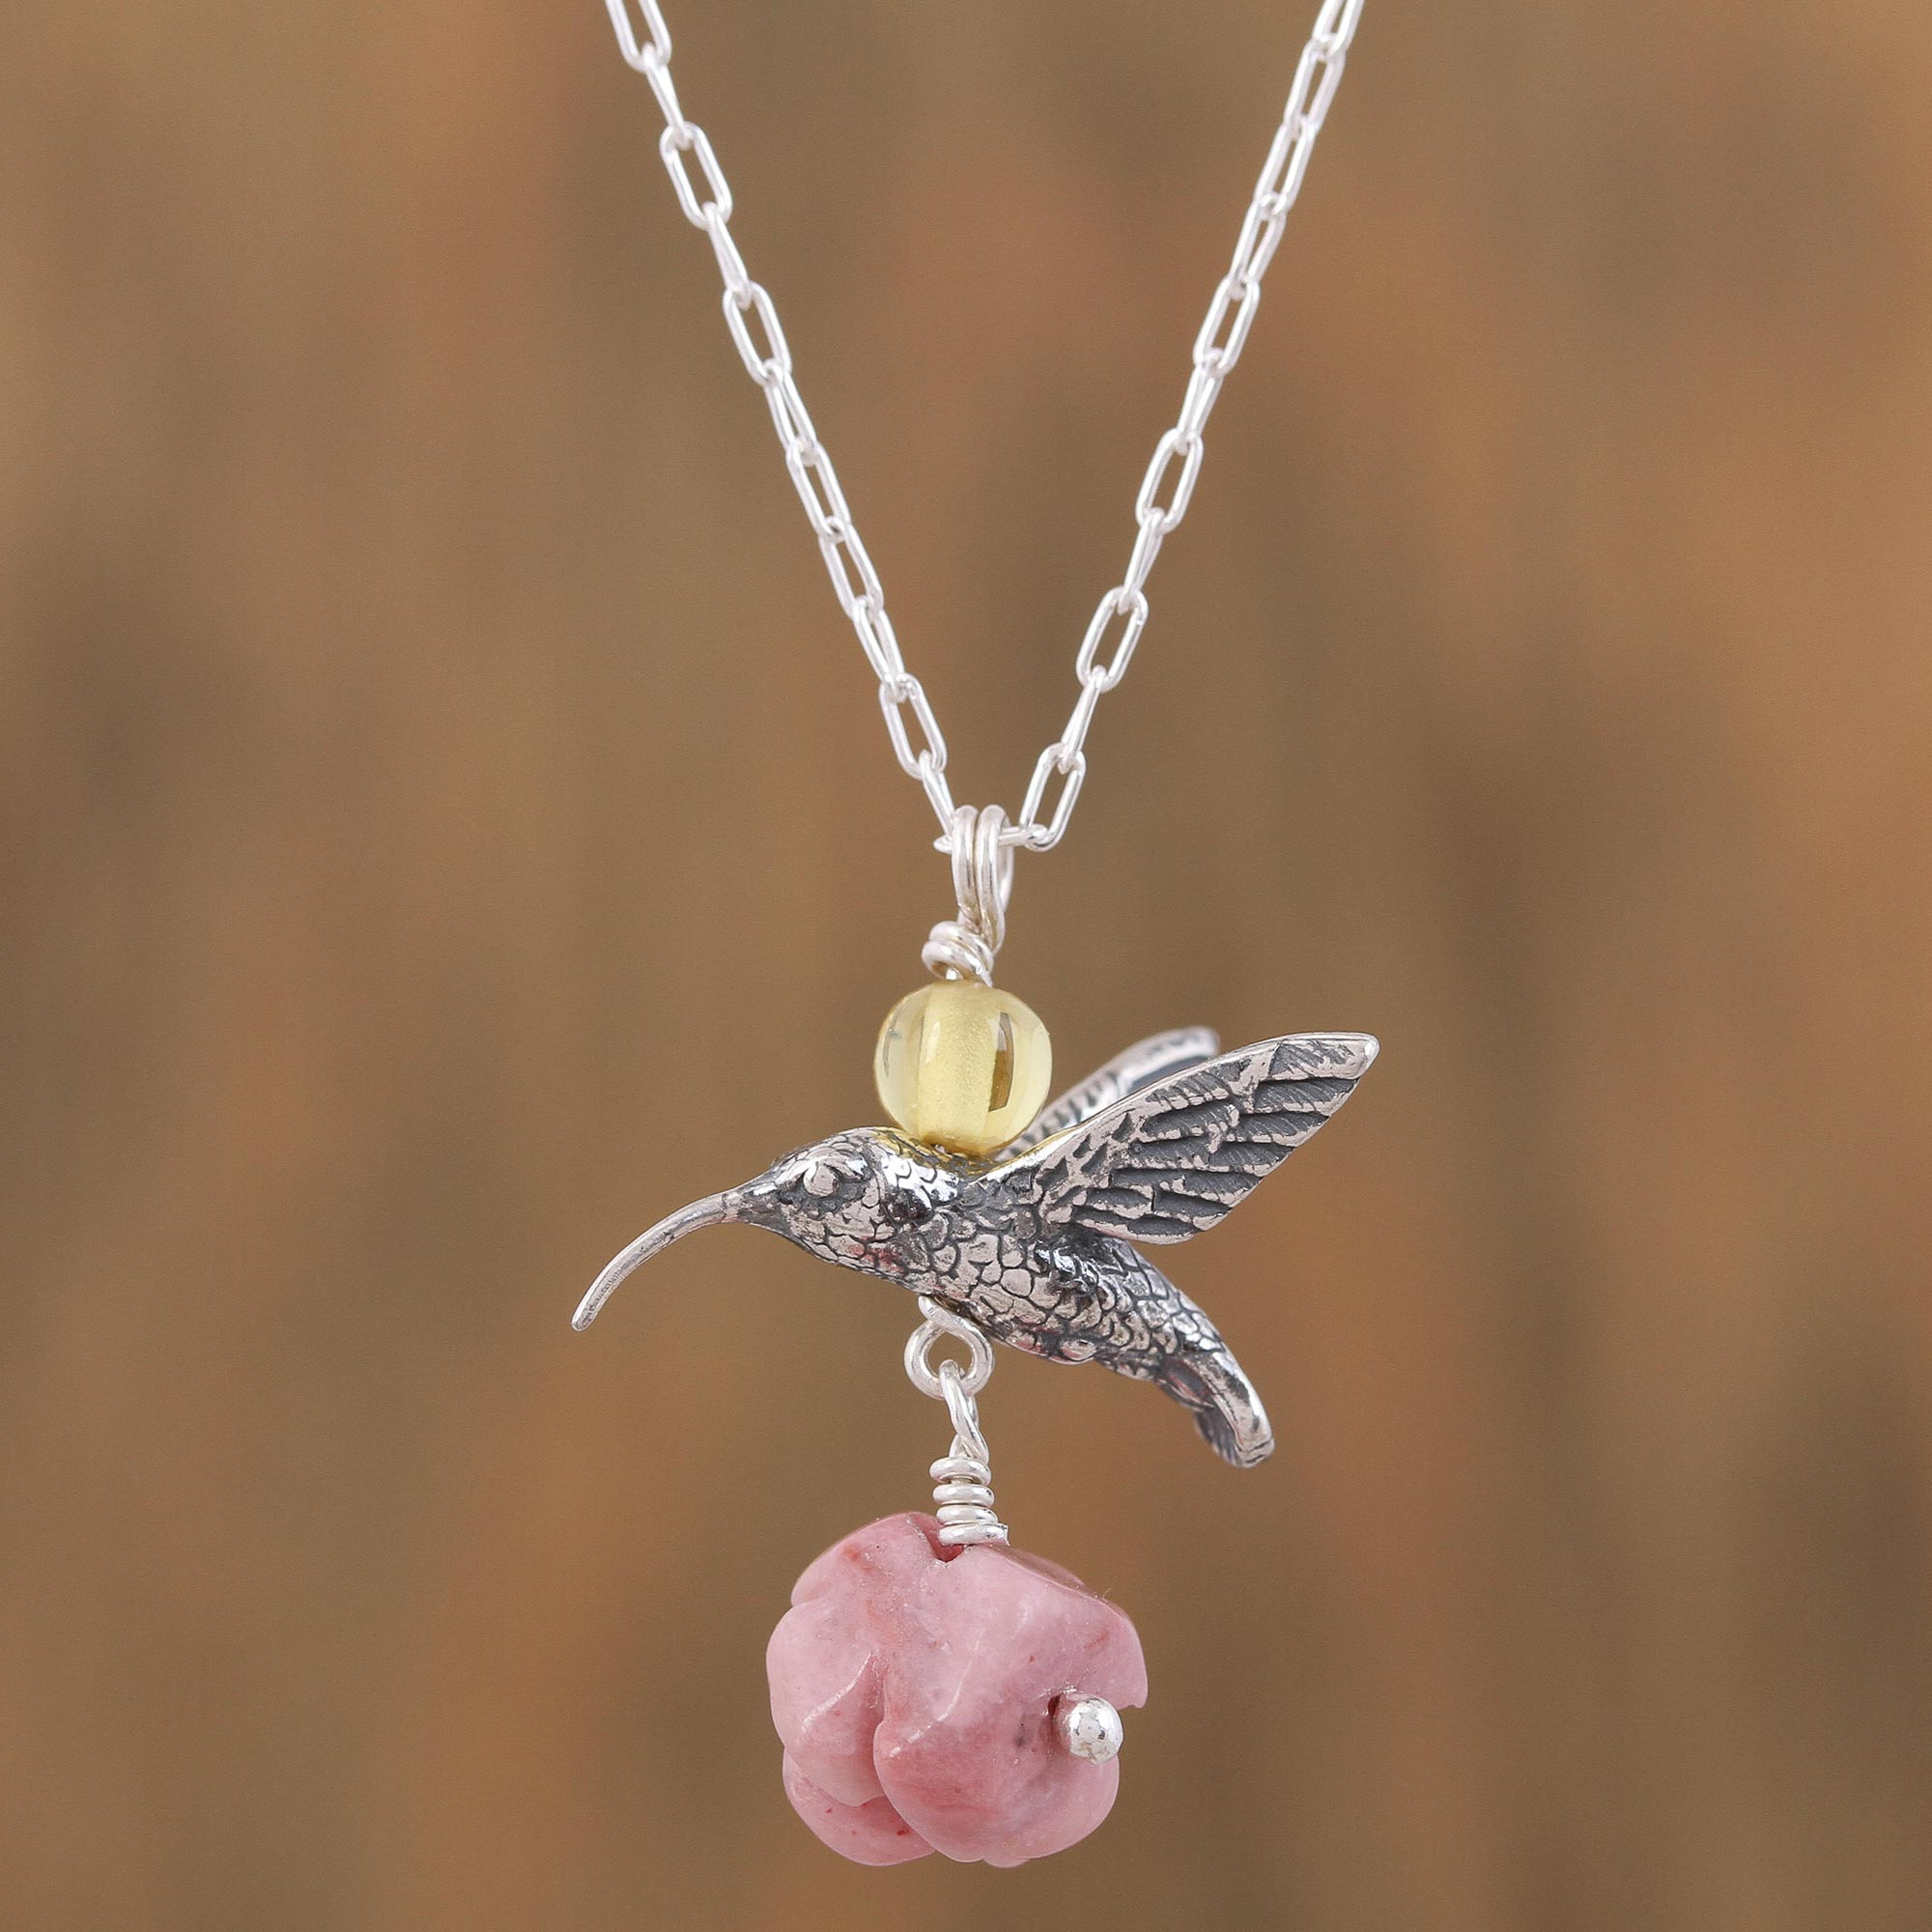 Bird Necklace for Women Hummingbird with Heart Pendant 100% Real 925 Sterling Silver Gold Fine Jewelry Gift 